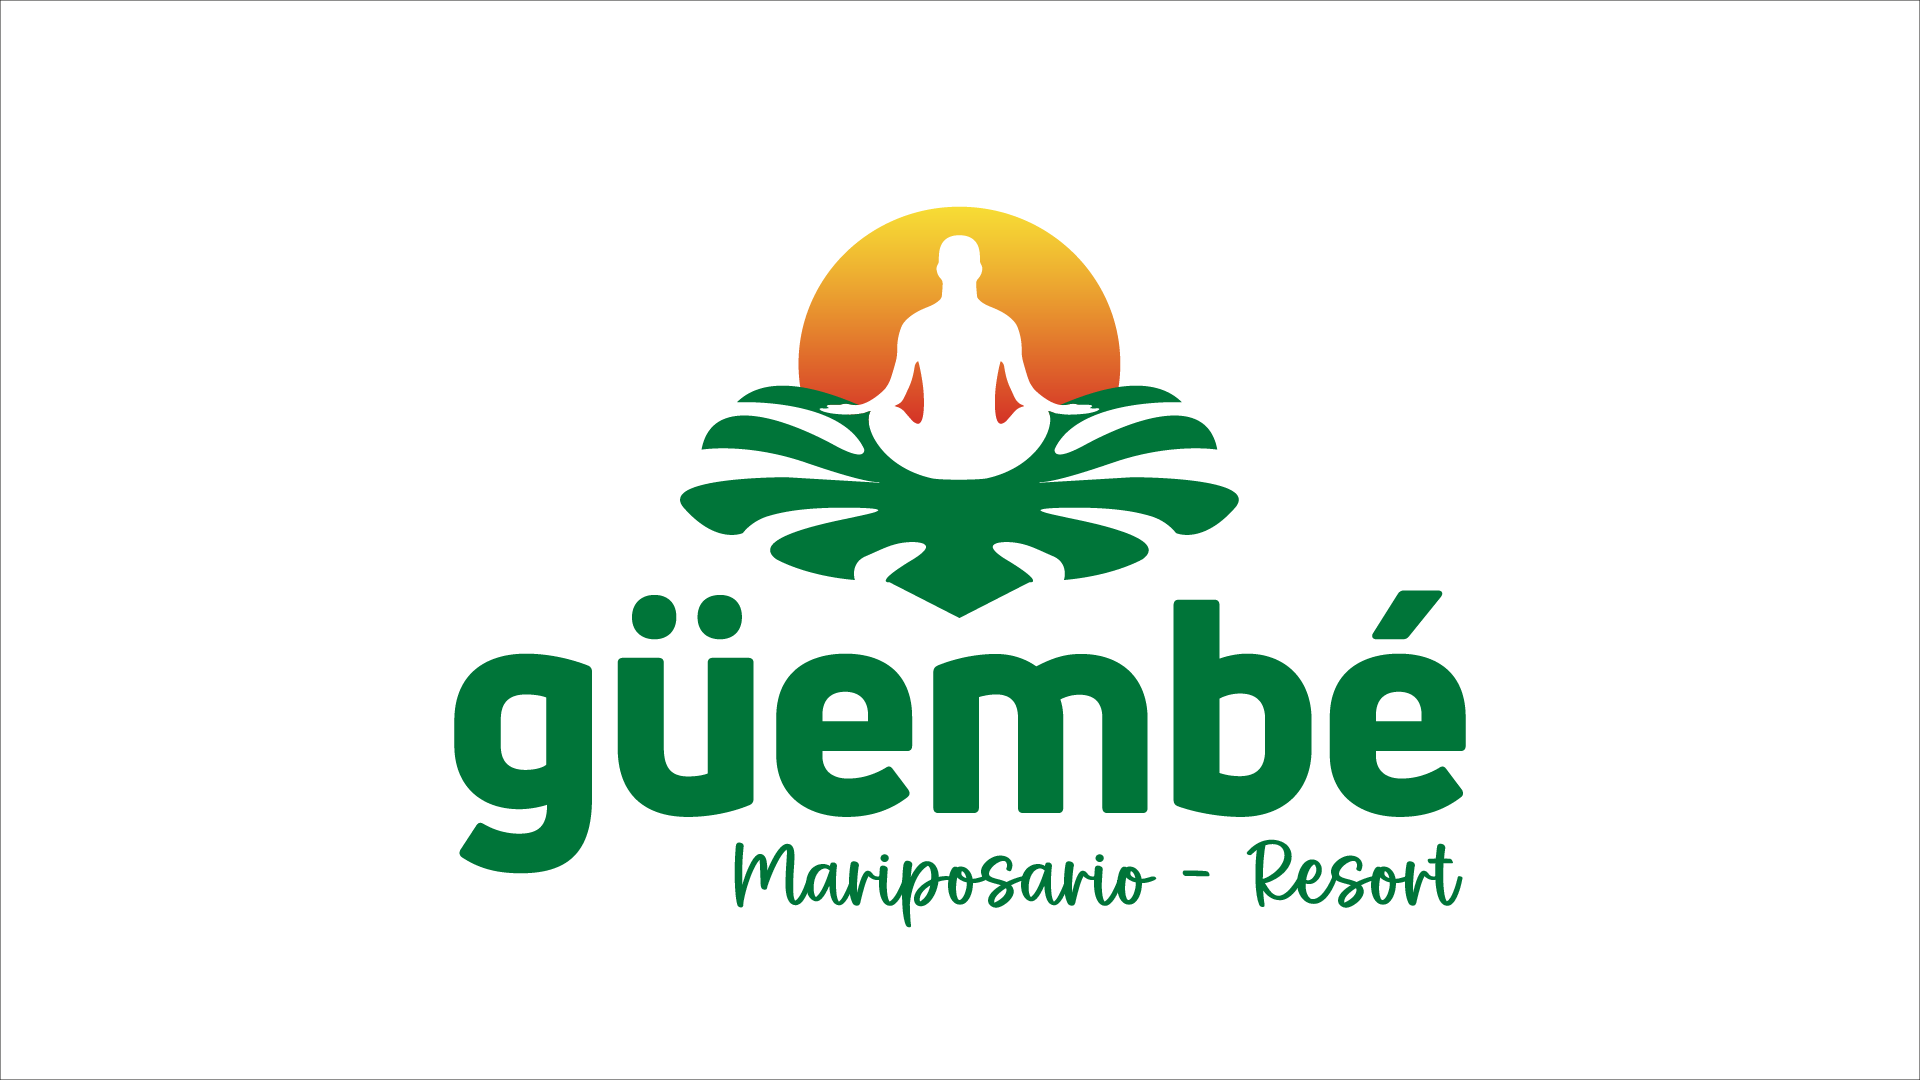 CoLearn Guembe